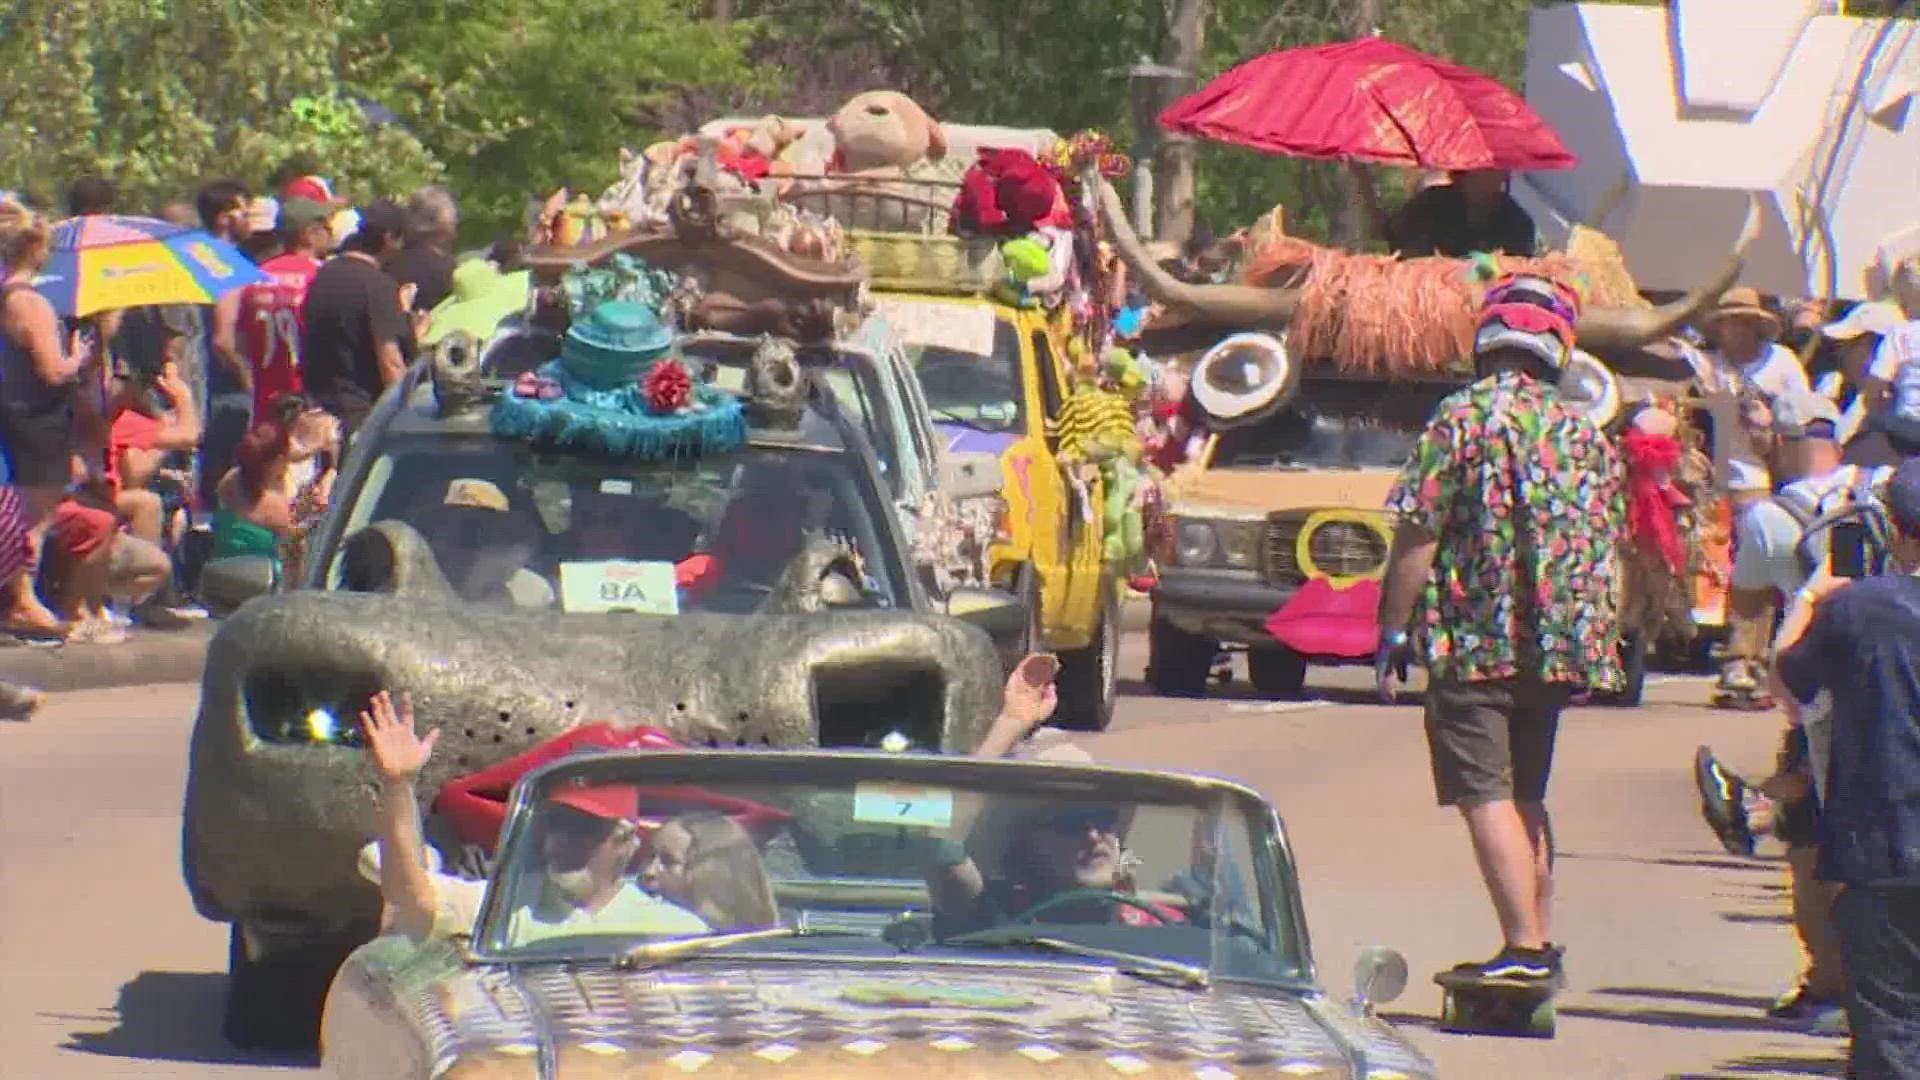 After a two-year break due to COVID-19, the Houston Art Car Parade is back for its 35th year.